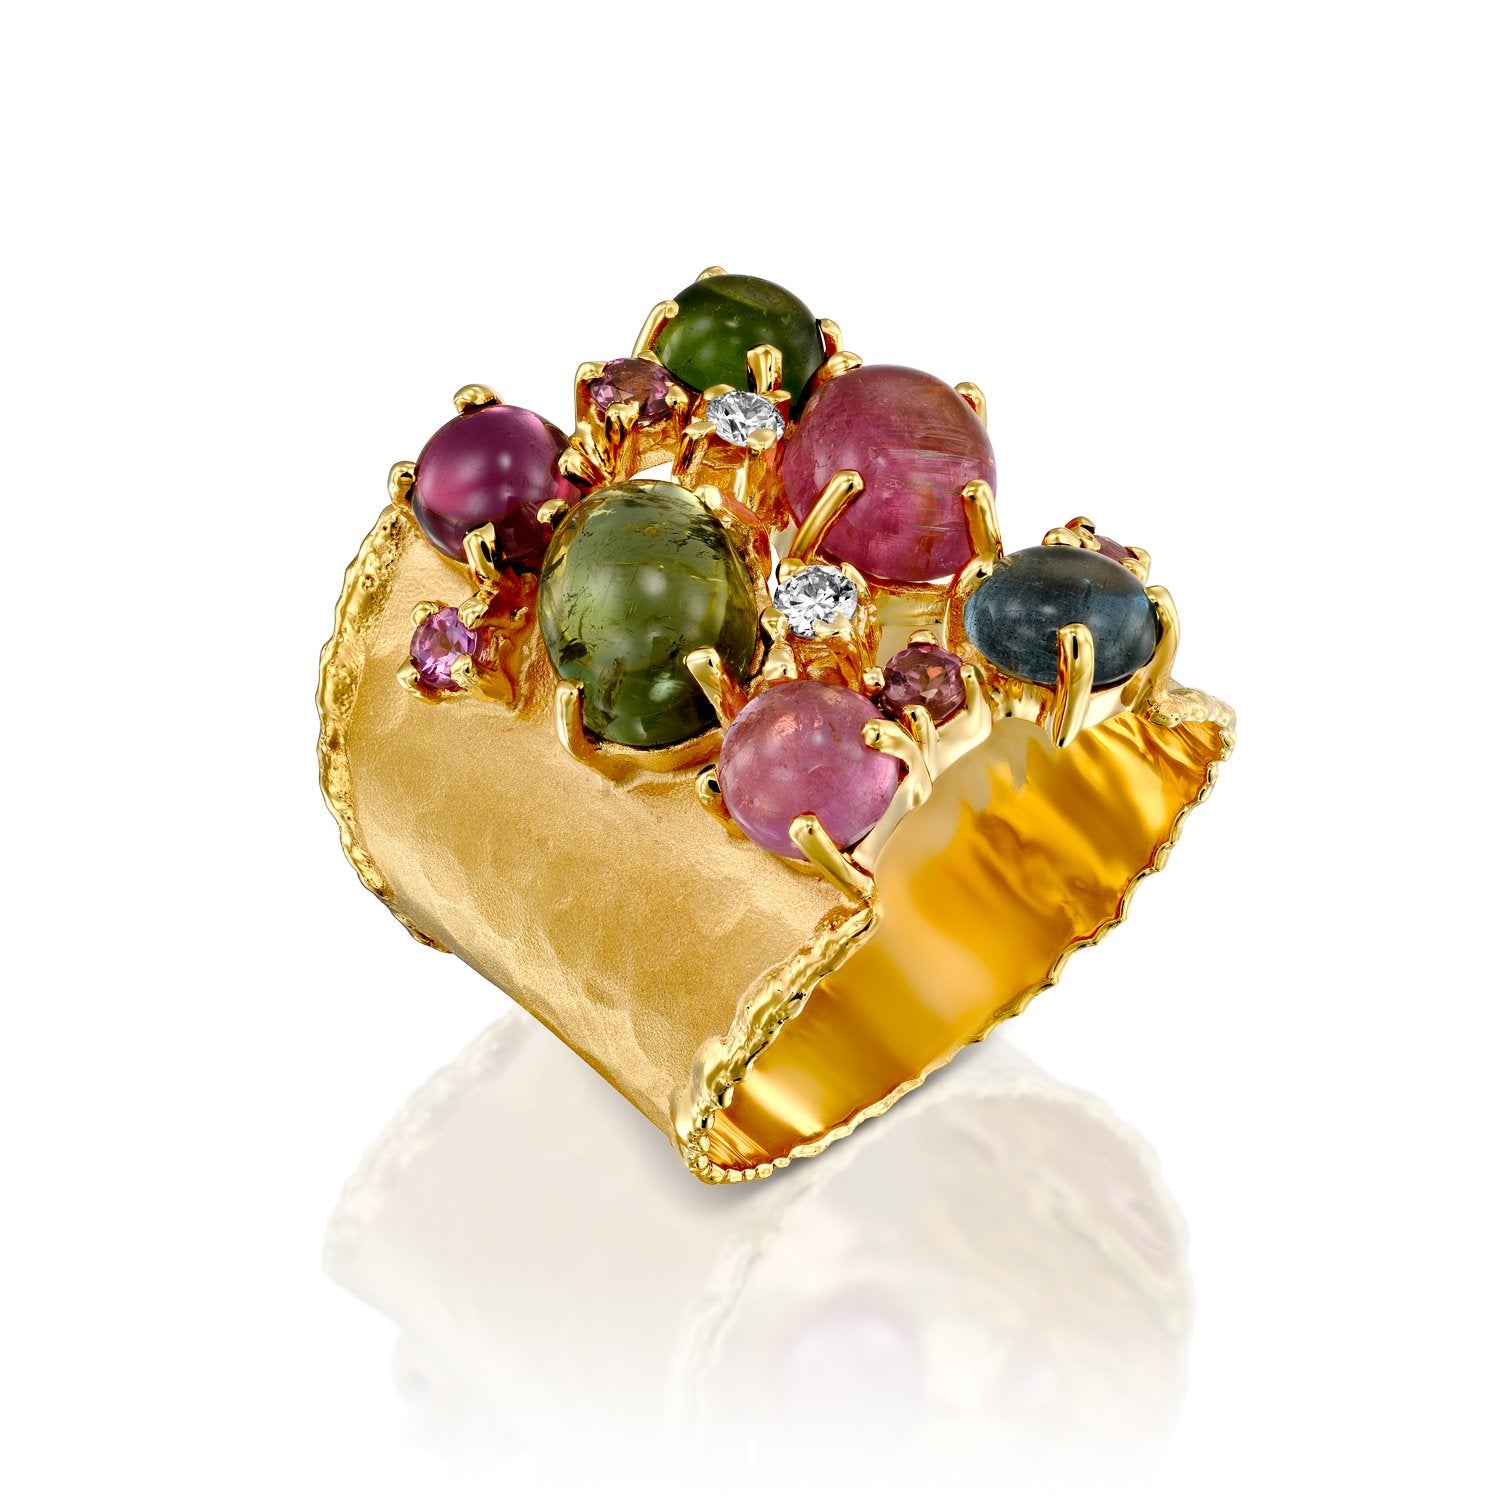 7302 - stunning 14kt handmade matte finish gold ring with shiny edges. mixed color natural cabochon tourmaline & faceted pink sapphires. .10cttw diamond of the finest quality.